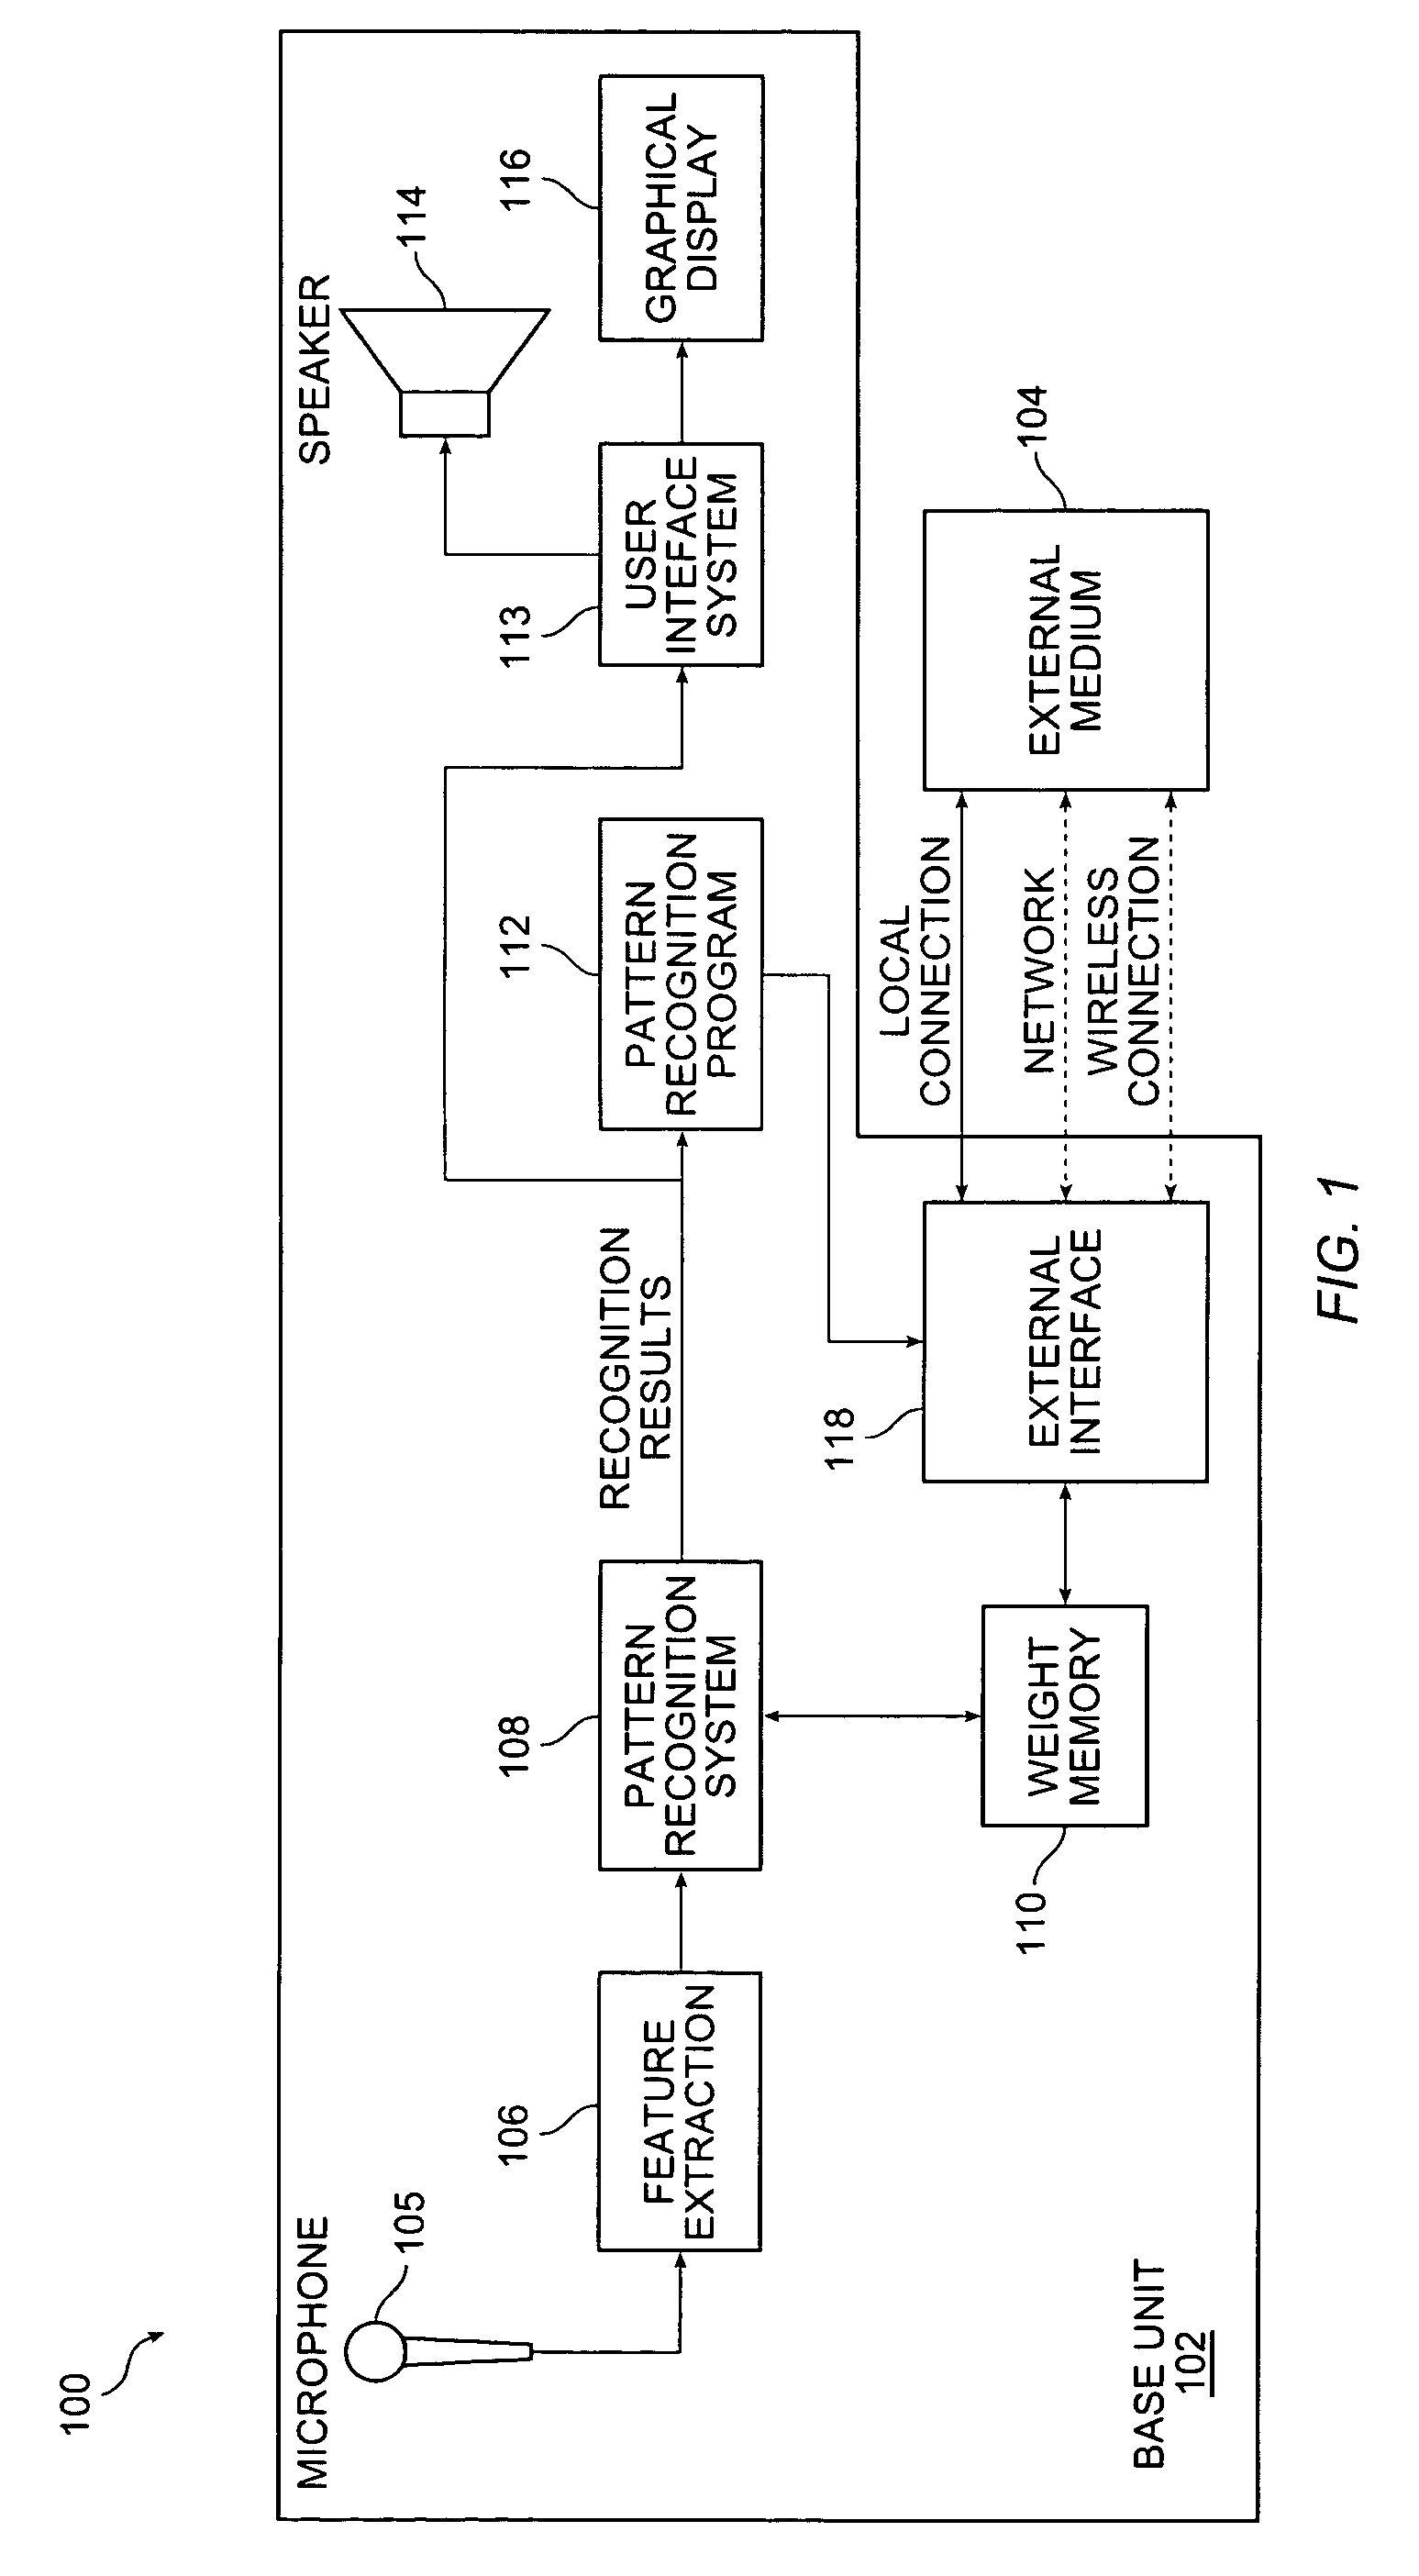 Method of performing speech recognition across a network